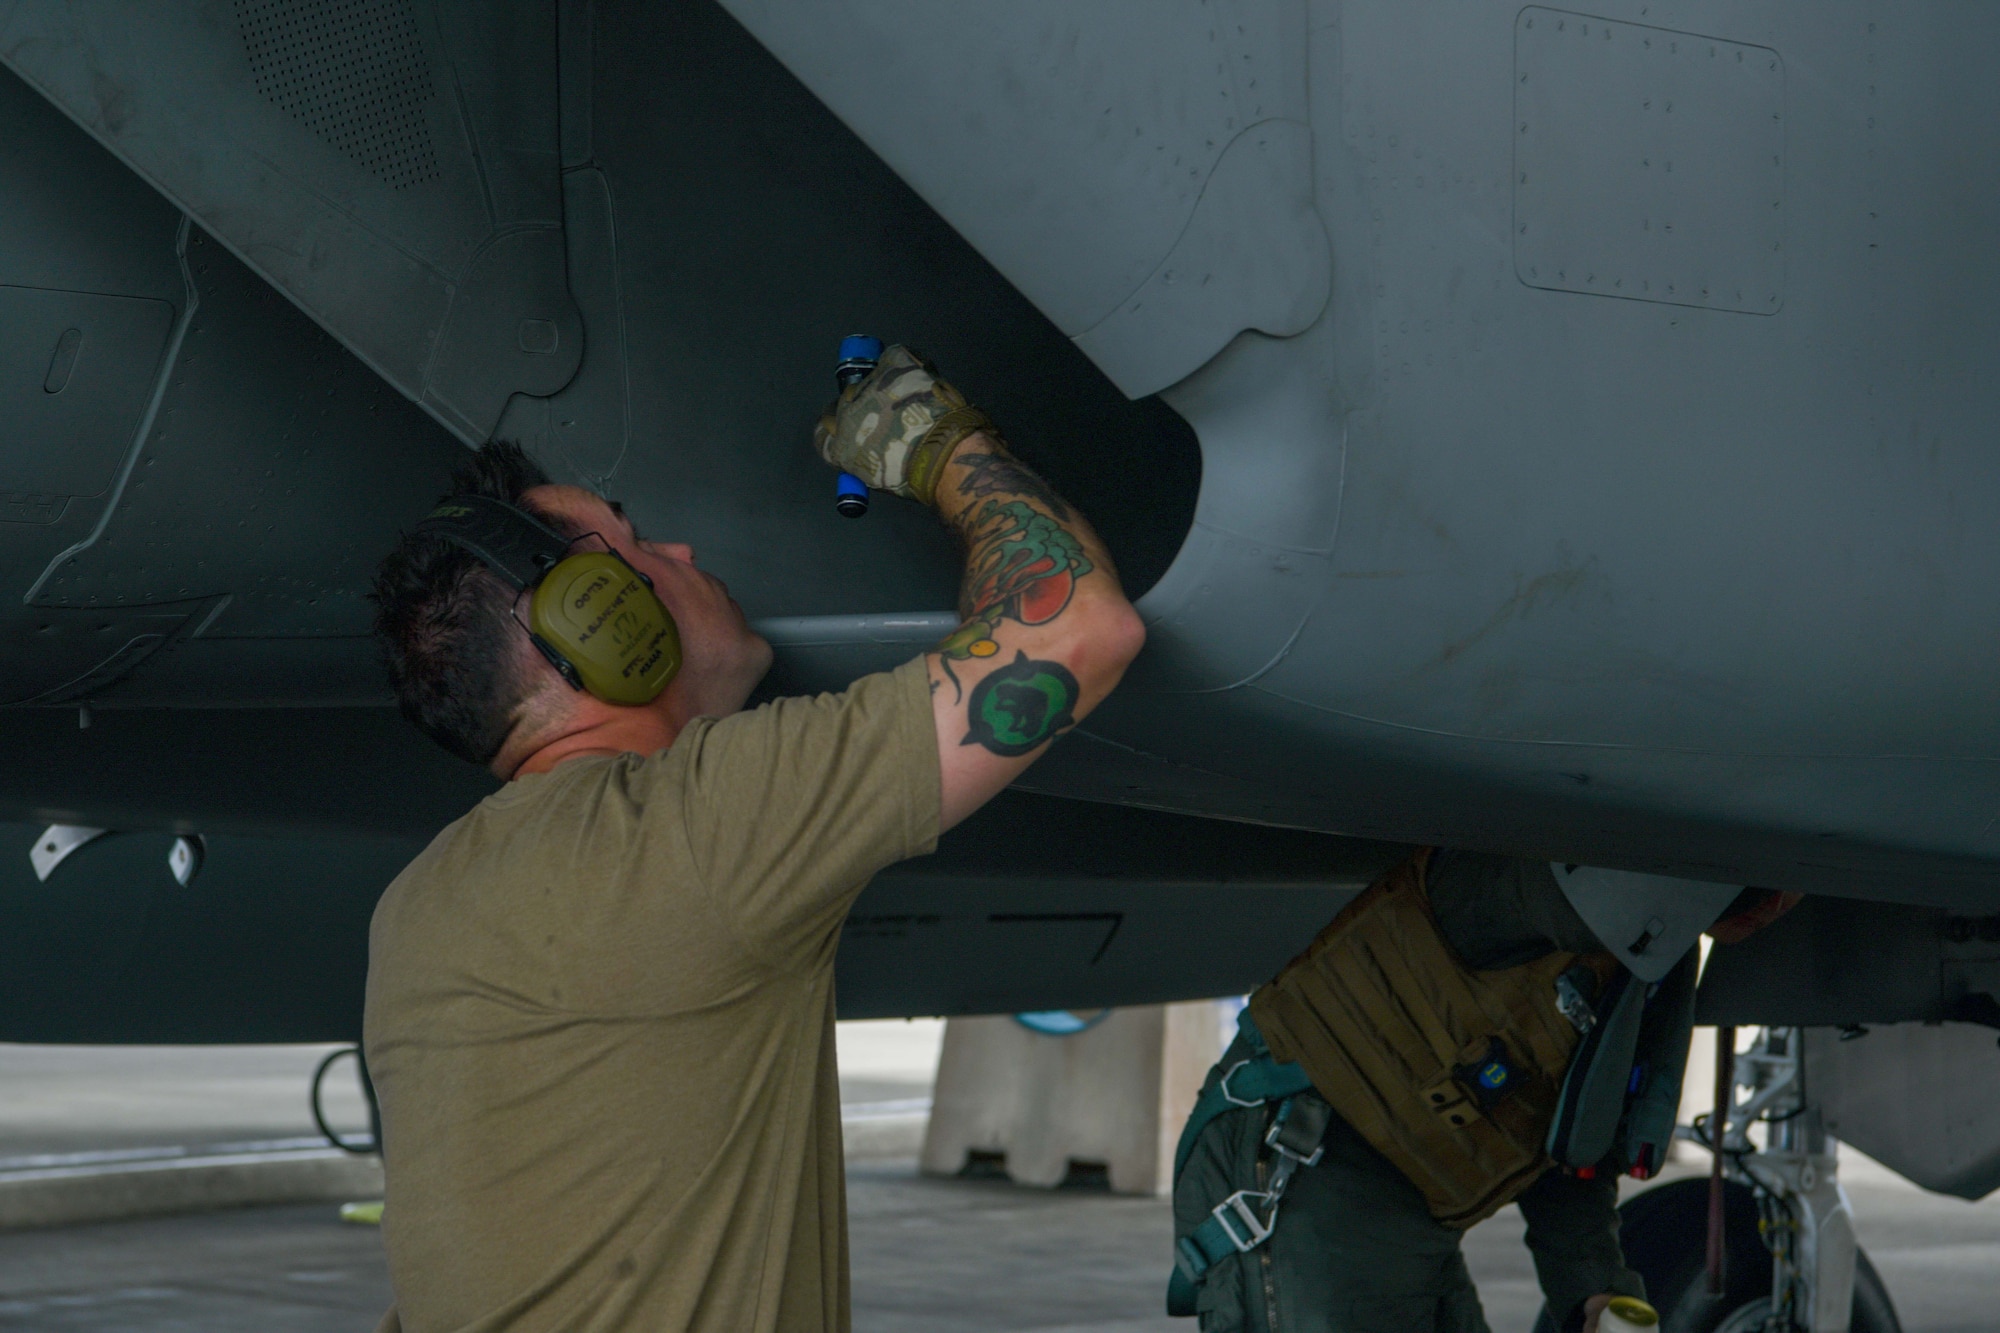 Crew chief completes a post flight check of an F-15C Eagle.